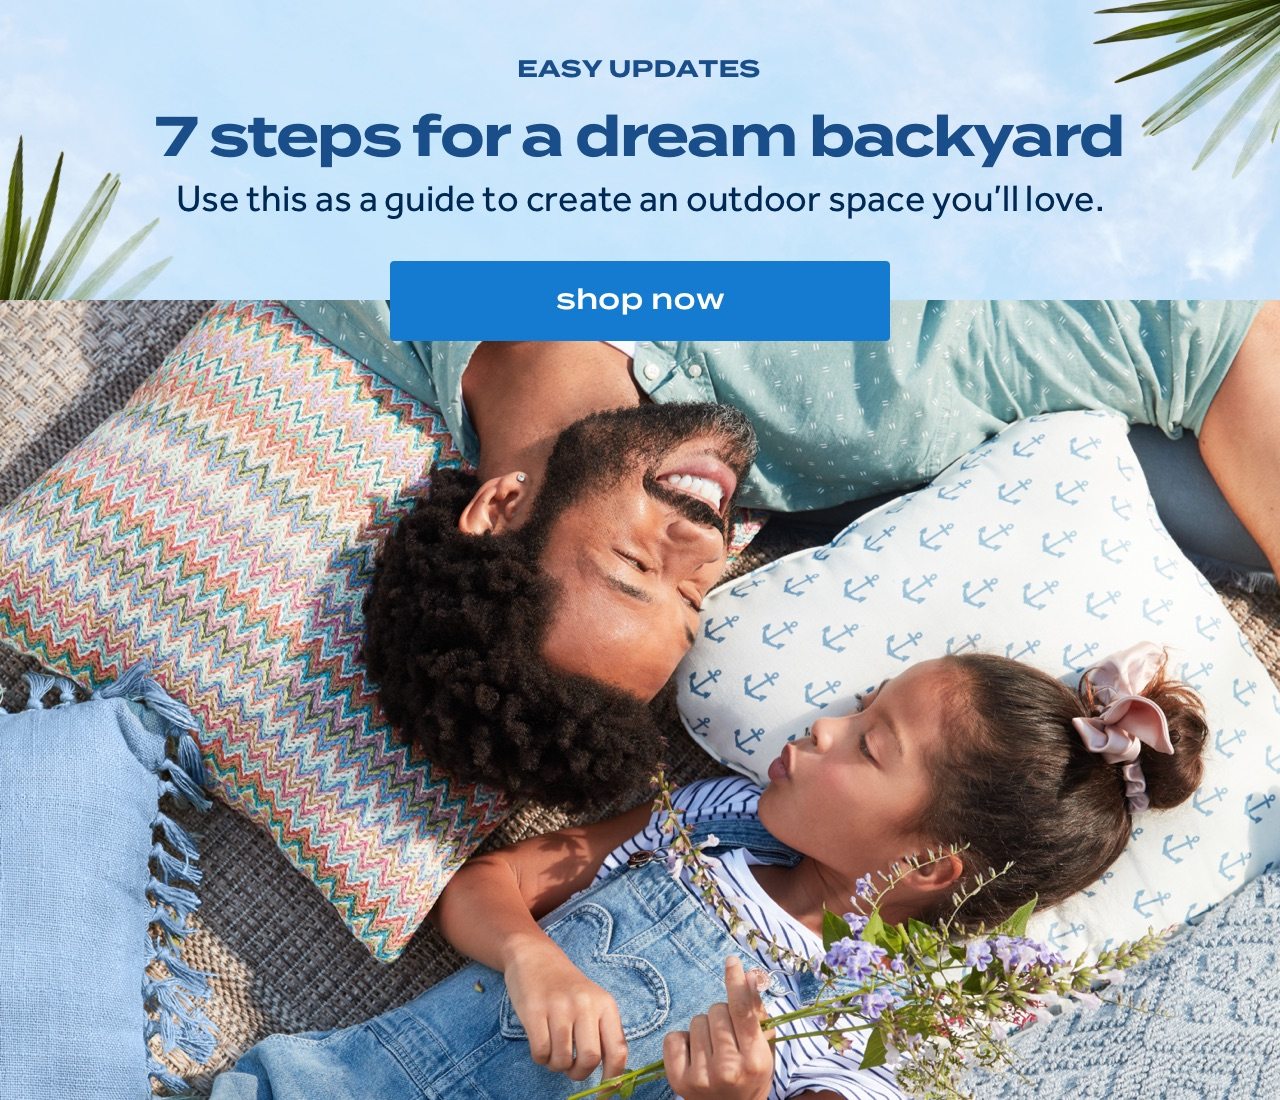 EASY UPDATES. 7 steps for a dream backyard. Use this as a guide to create an outdoor space you’ll love. shop now